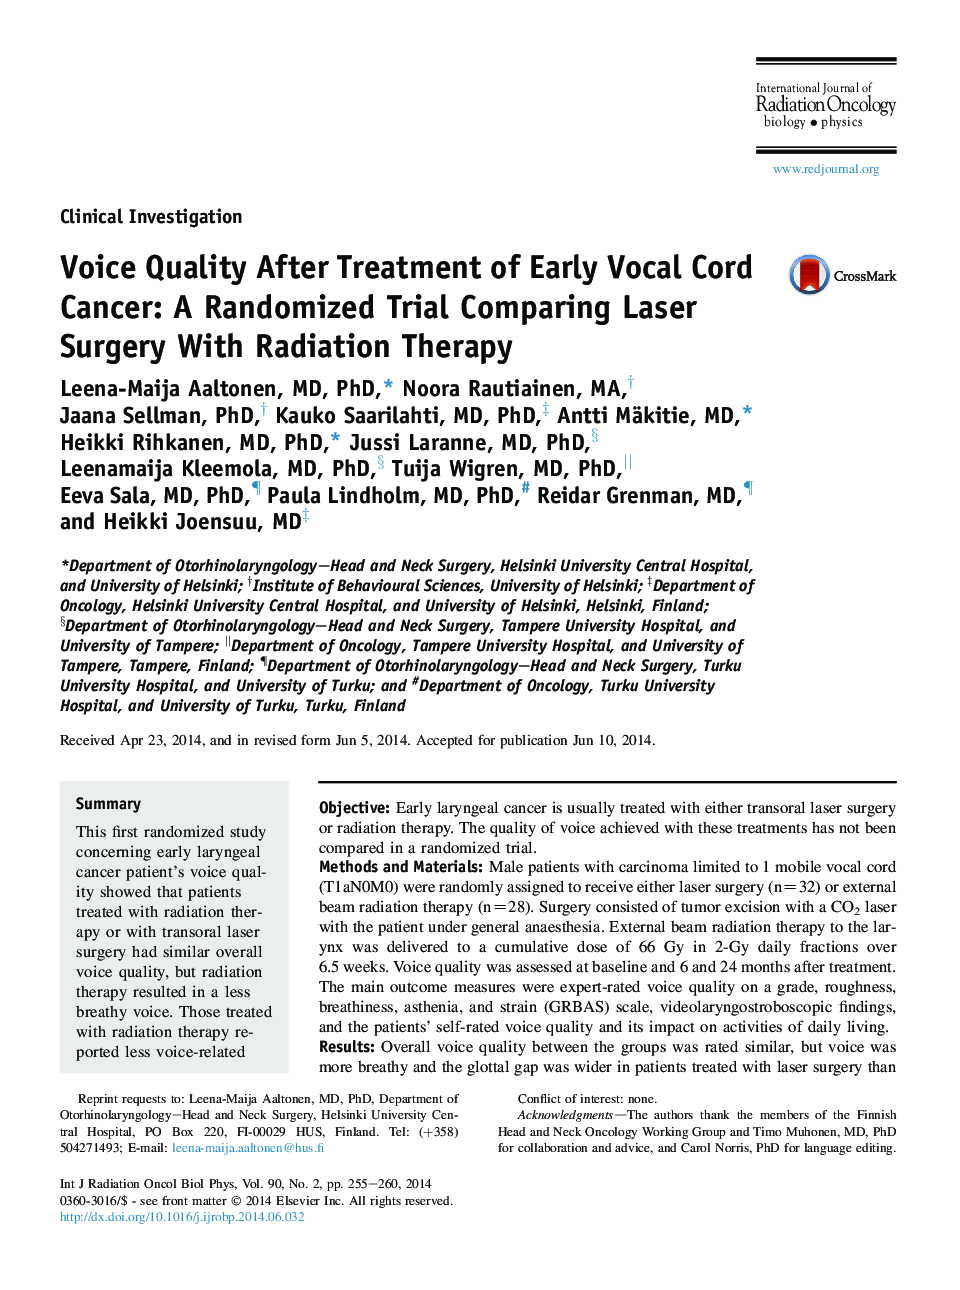 Voice Quality After Treatment of Early Vocal Cord Cancer: A Randomized Trial Comparing Laser Surgery With Radiation Therapy